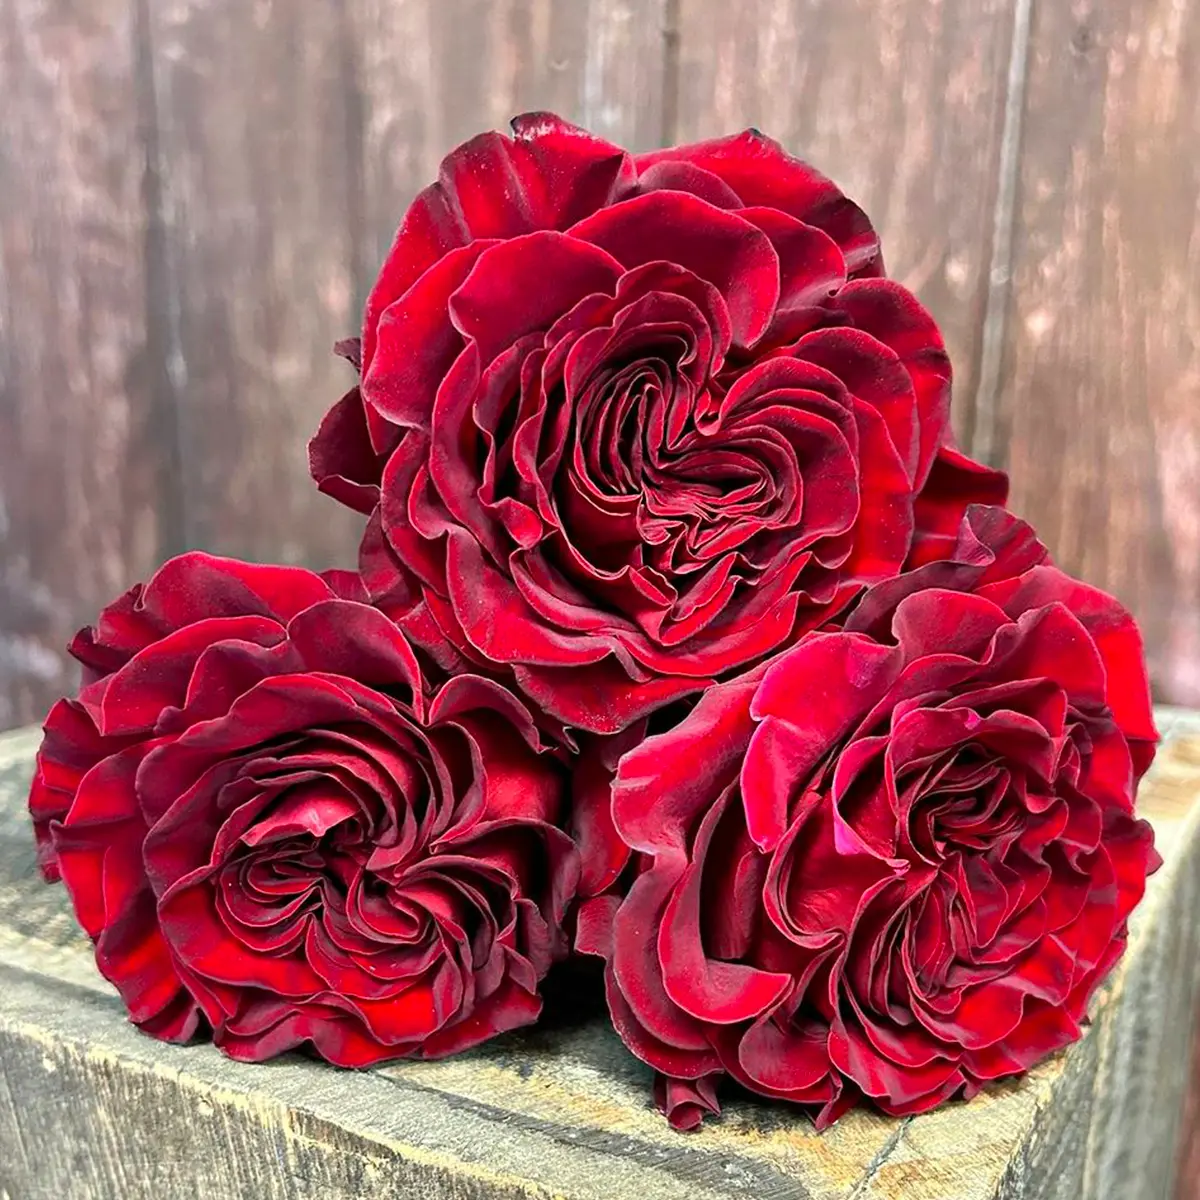 rose-hearts-is-ideal-for-valentines-day-featured